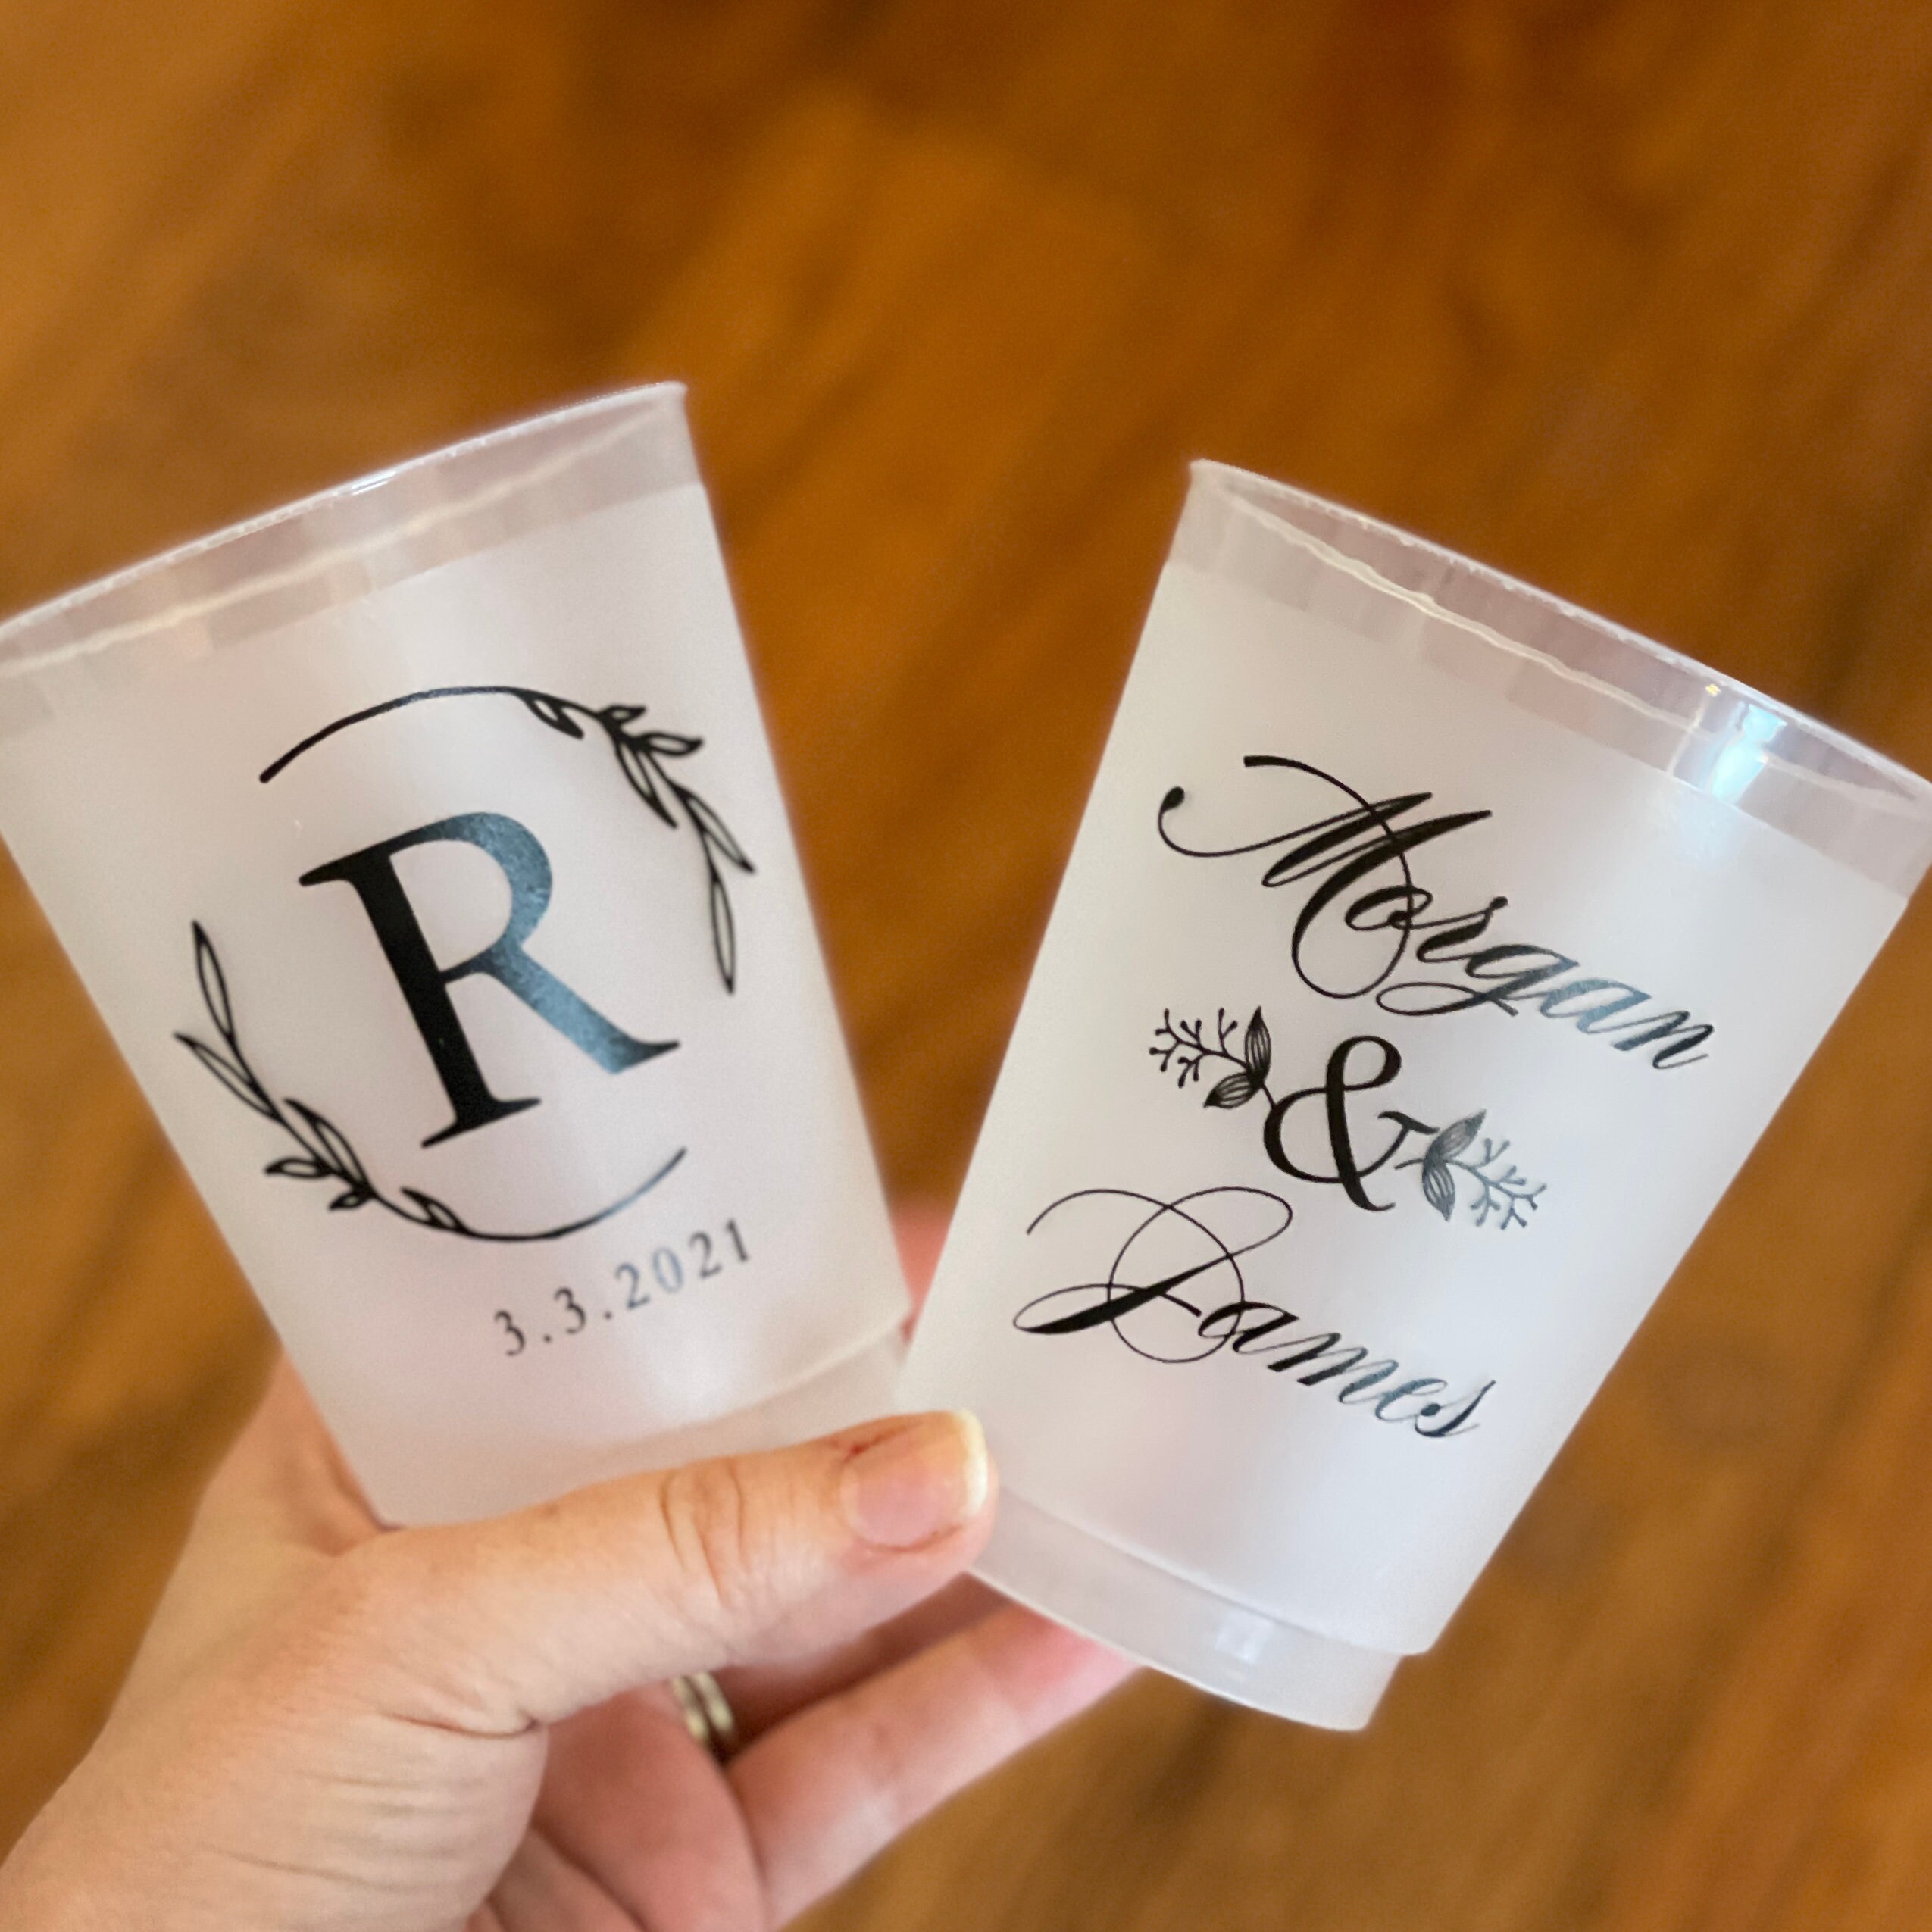 Modern Monogram Party Cups